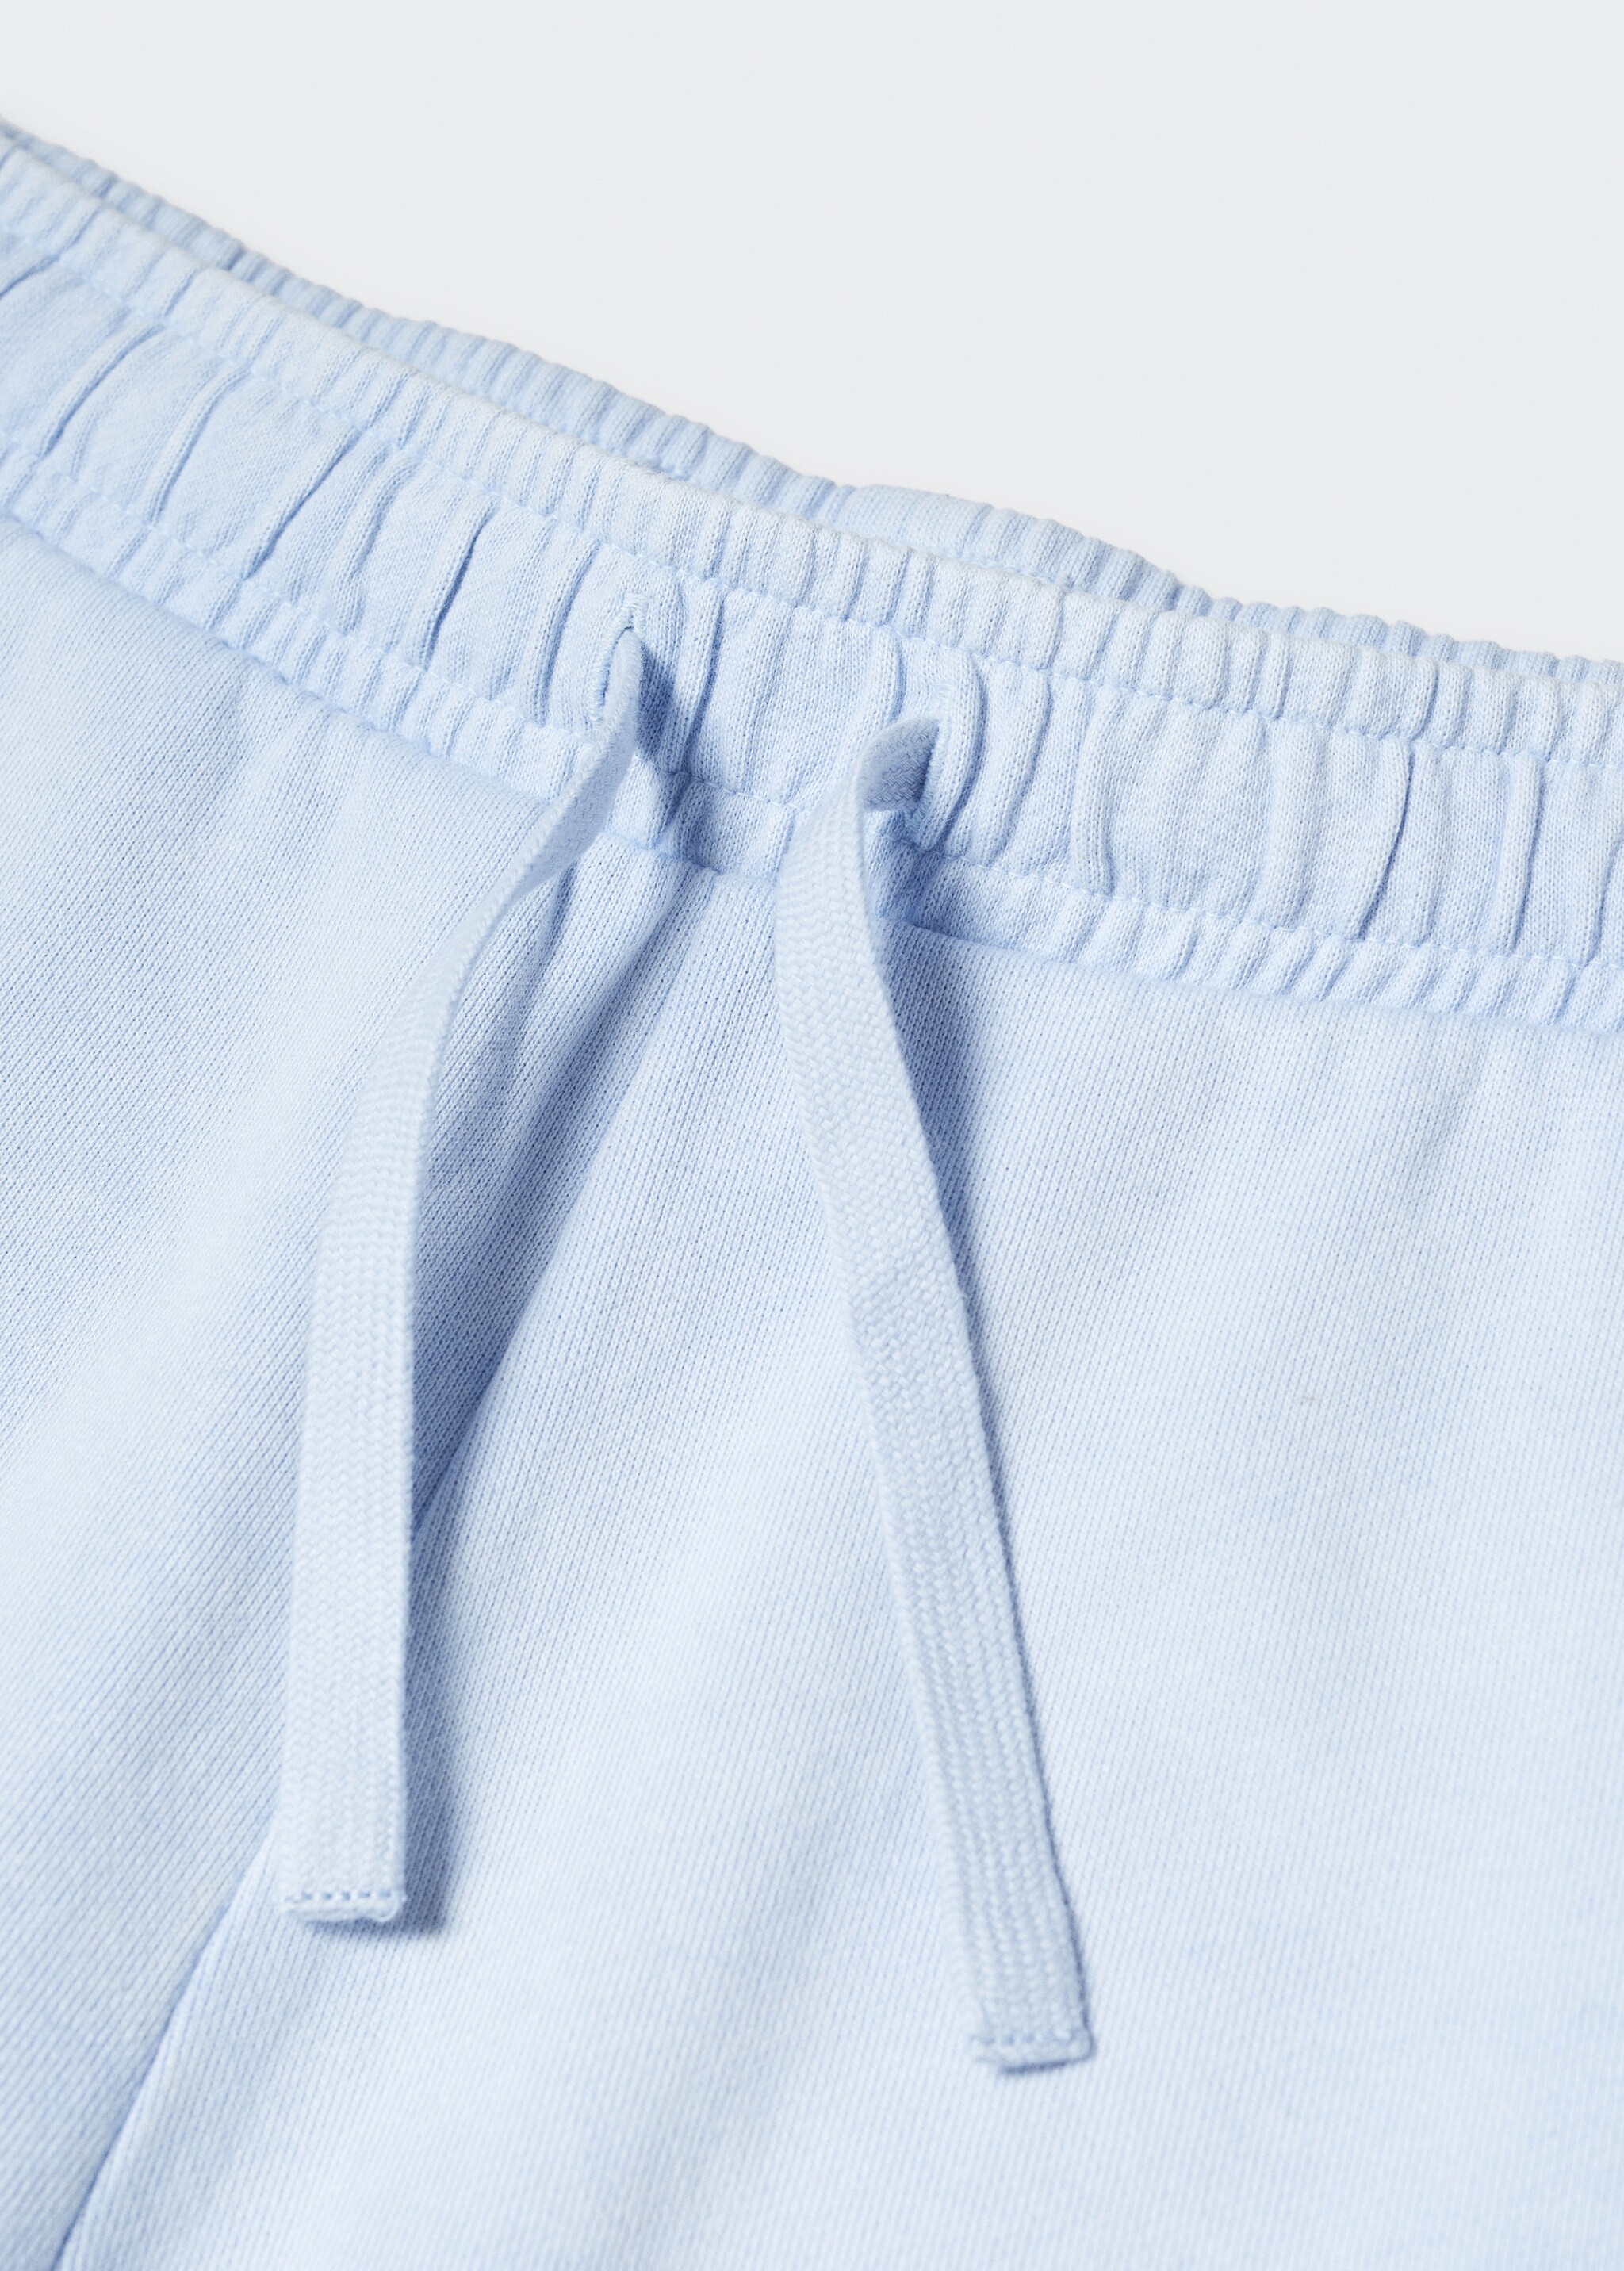 Dyed cotton jogging shorts - Details of the article 8